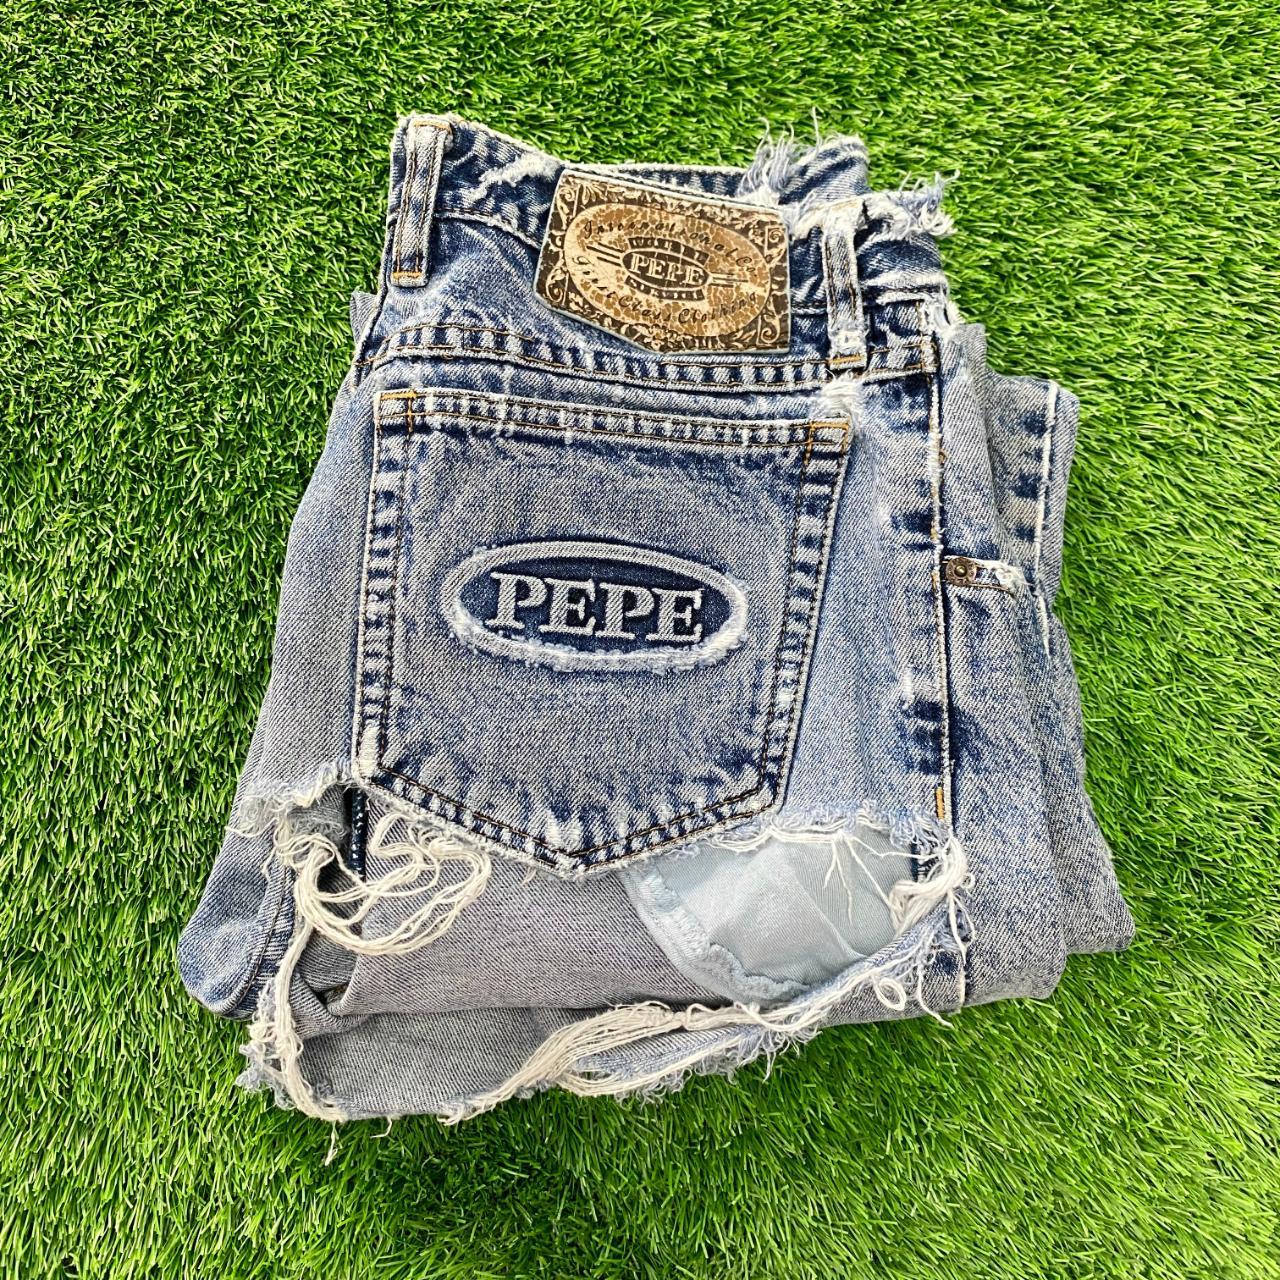 Product Image 1 - Pepe vintage 90s jeans. Upcycled